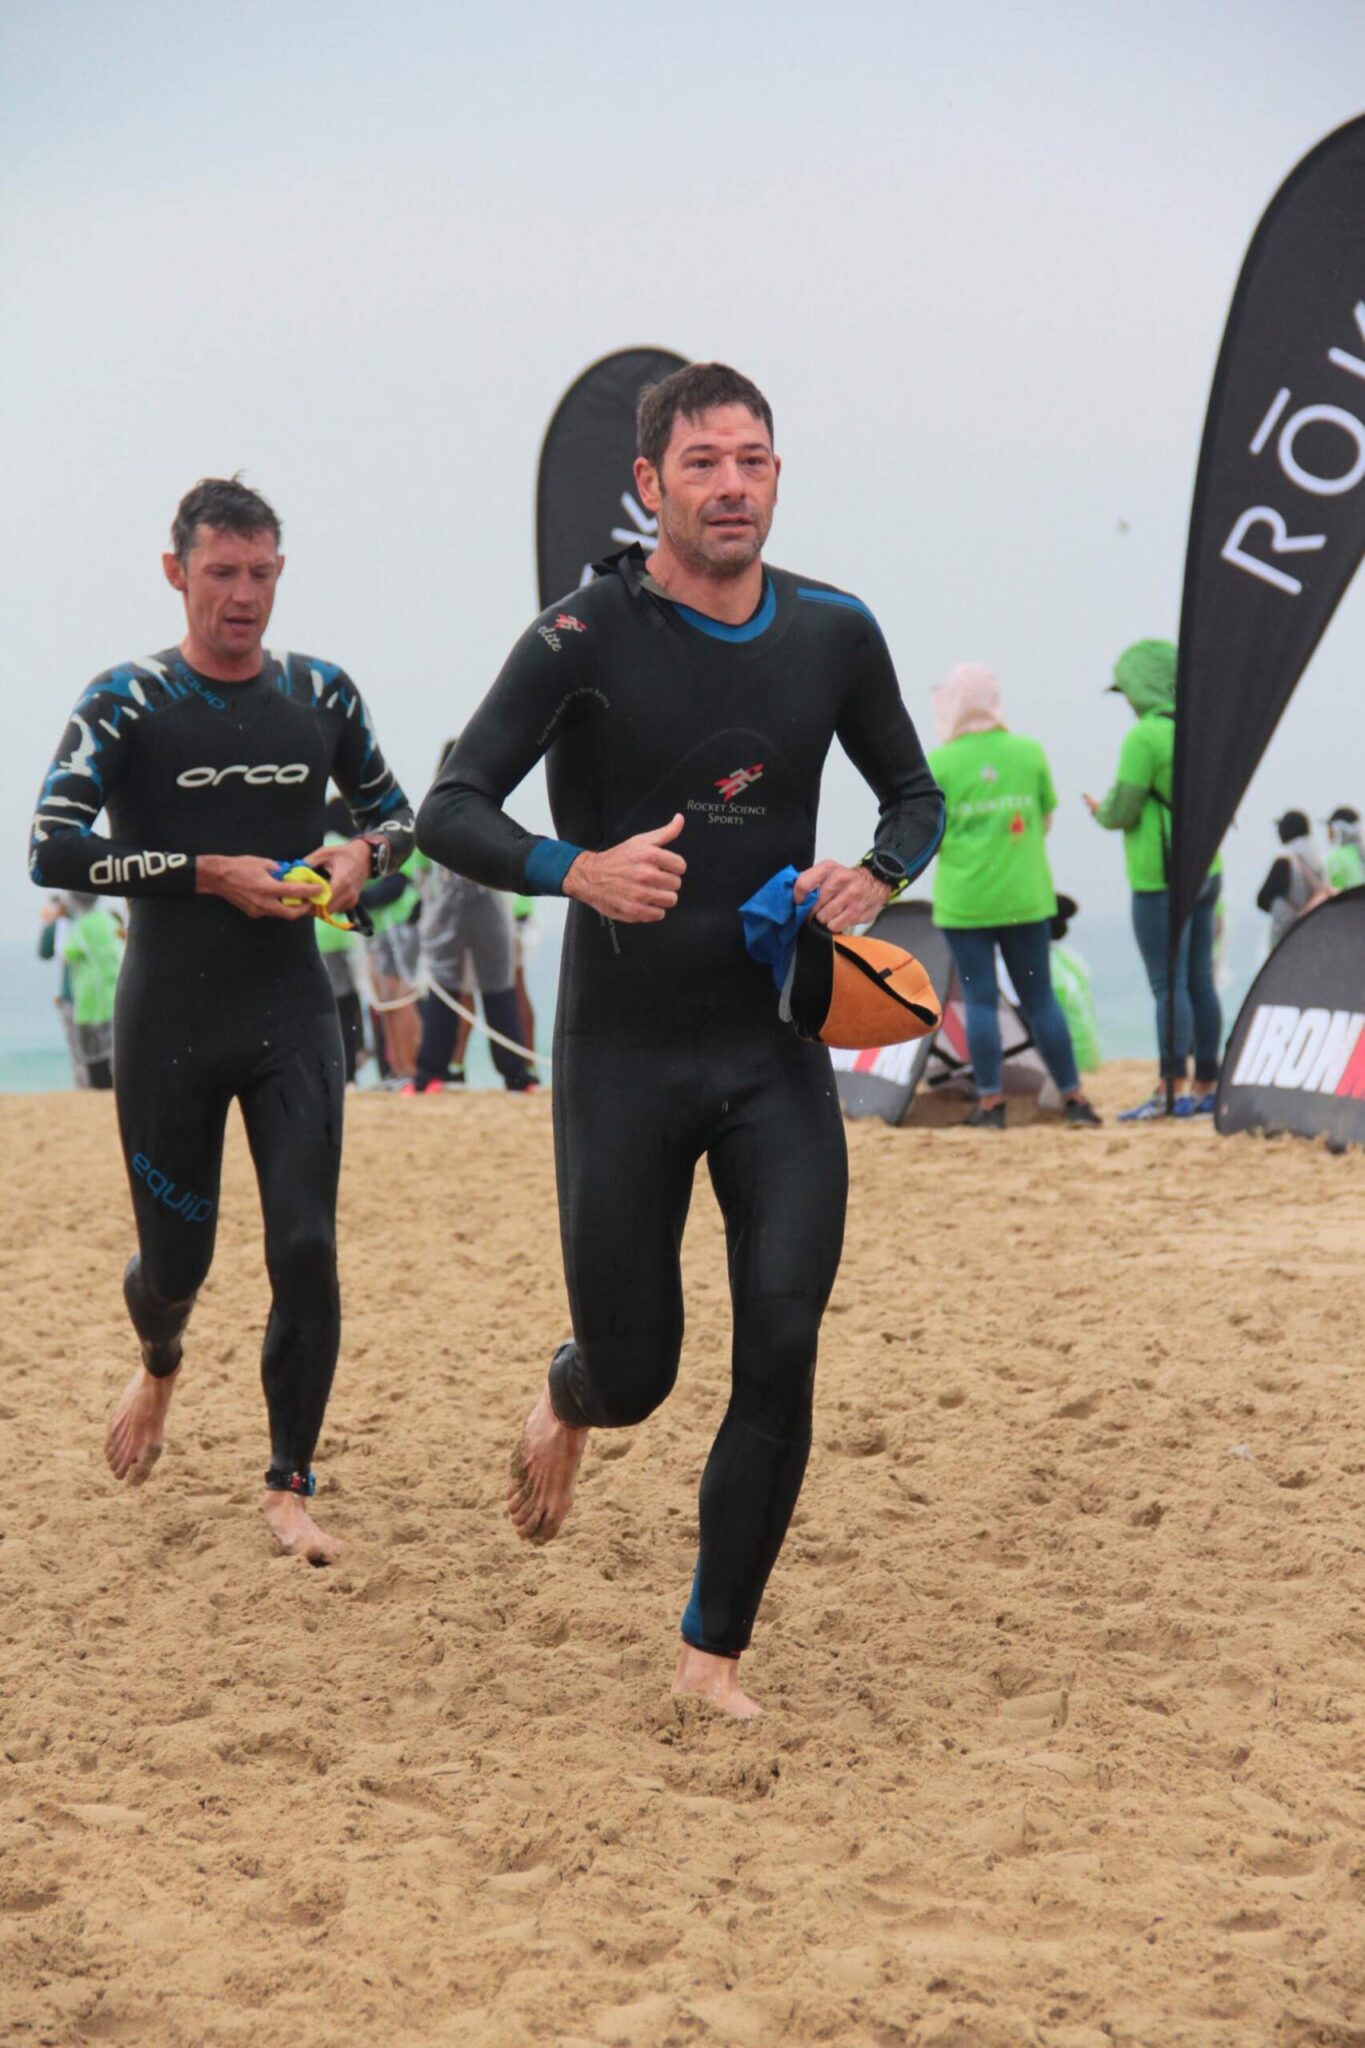 Ironman athletes exiting the water and running on a beach after a swim